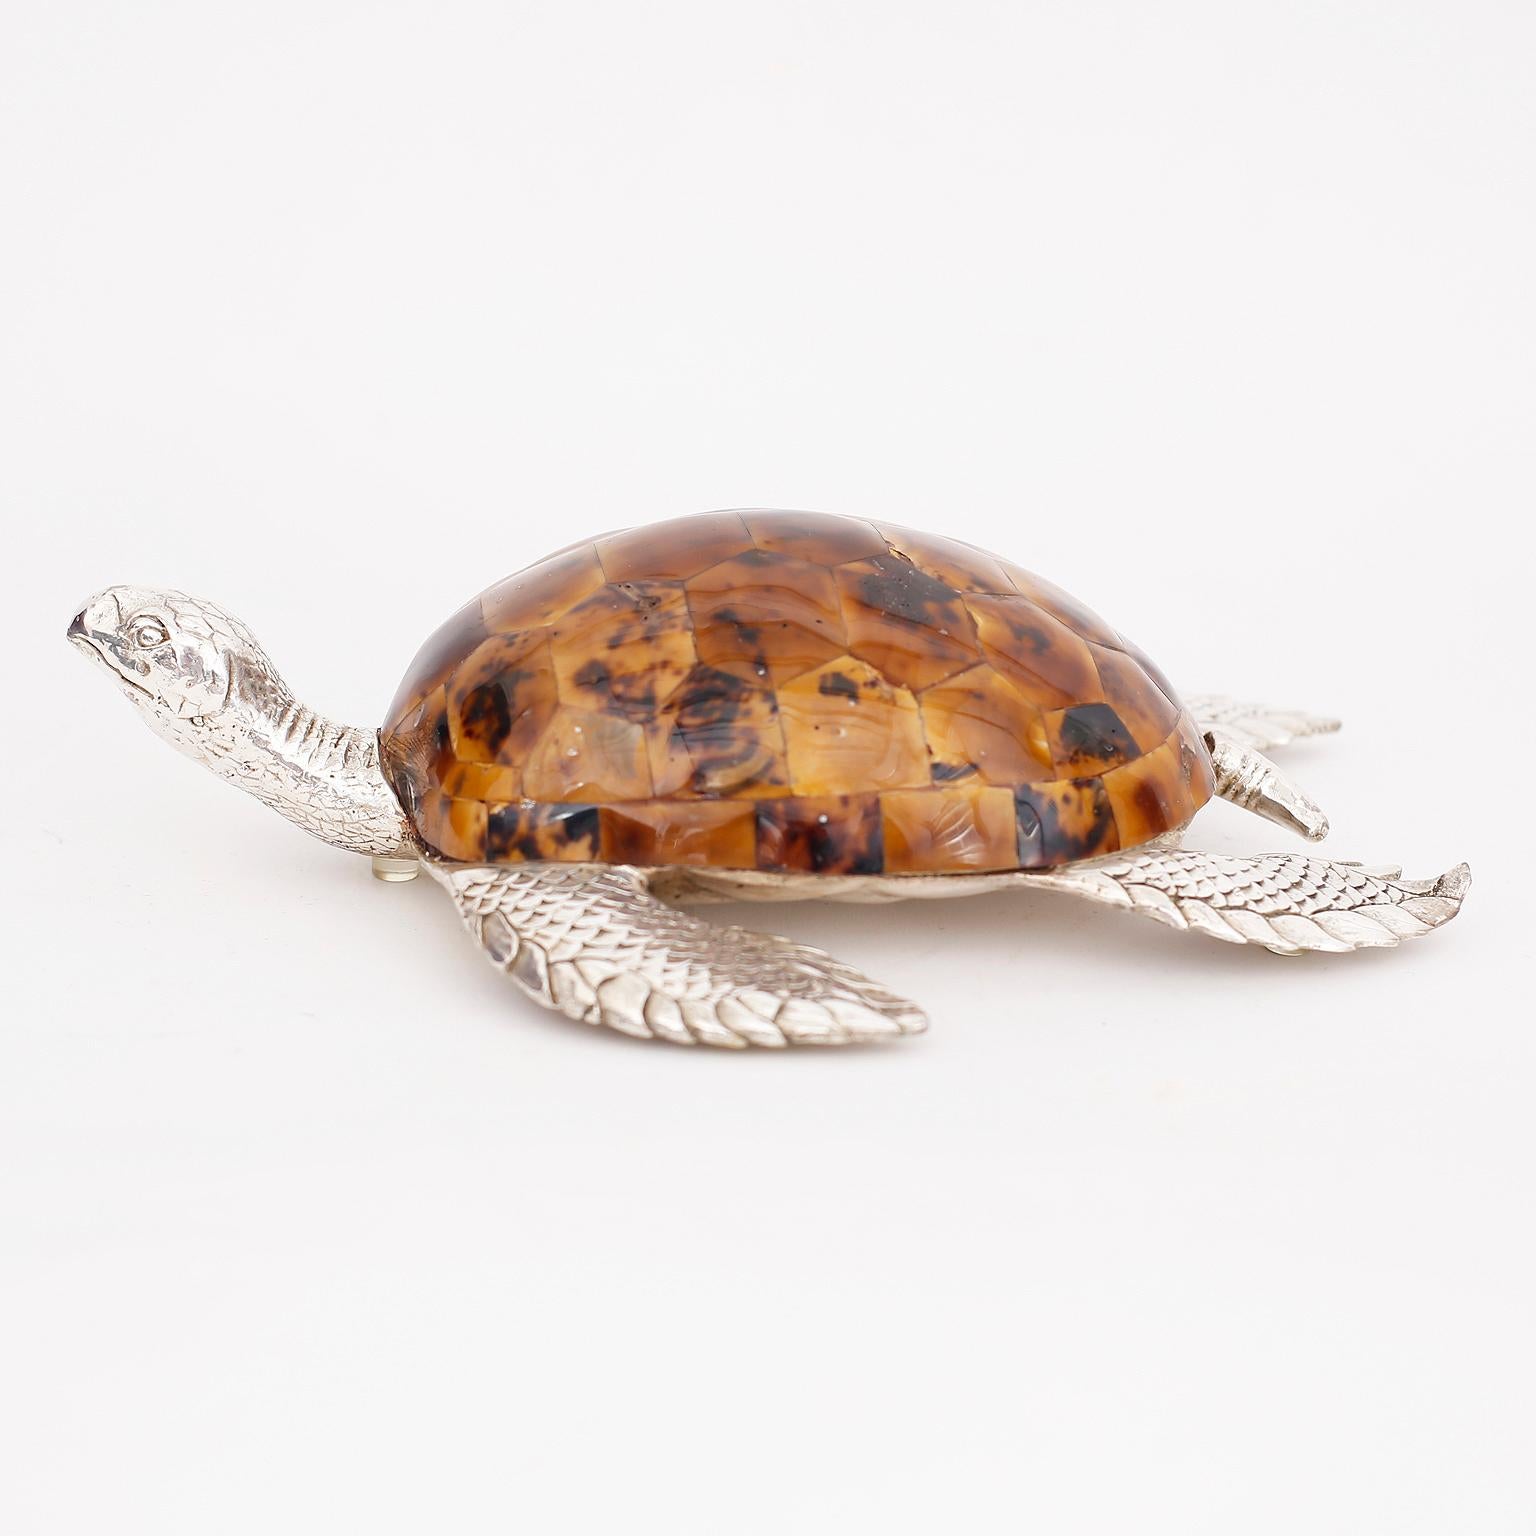 Mid century object of art of a sea turtle crafted in silver plate over bronze with a penshell shell. Signed Maitland Smith on the bottom.